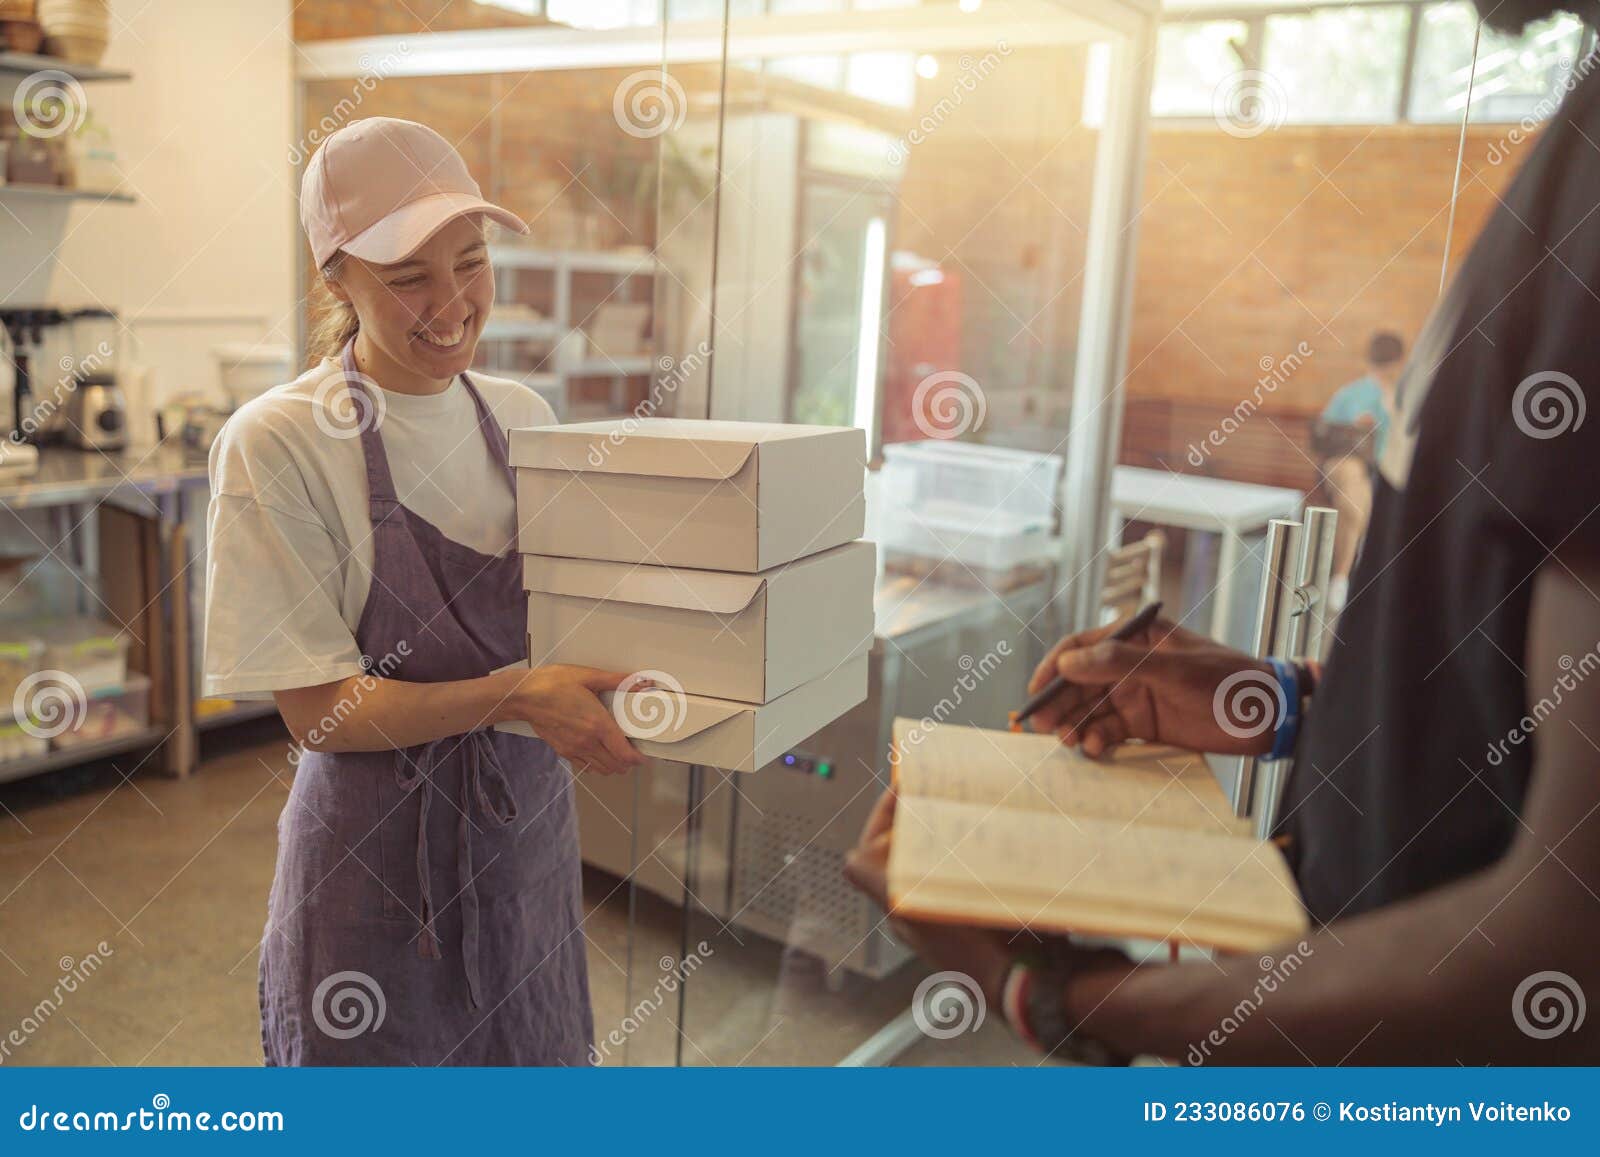 happy woman in cap holding food boxes